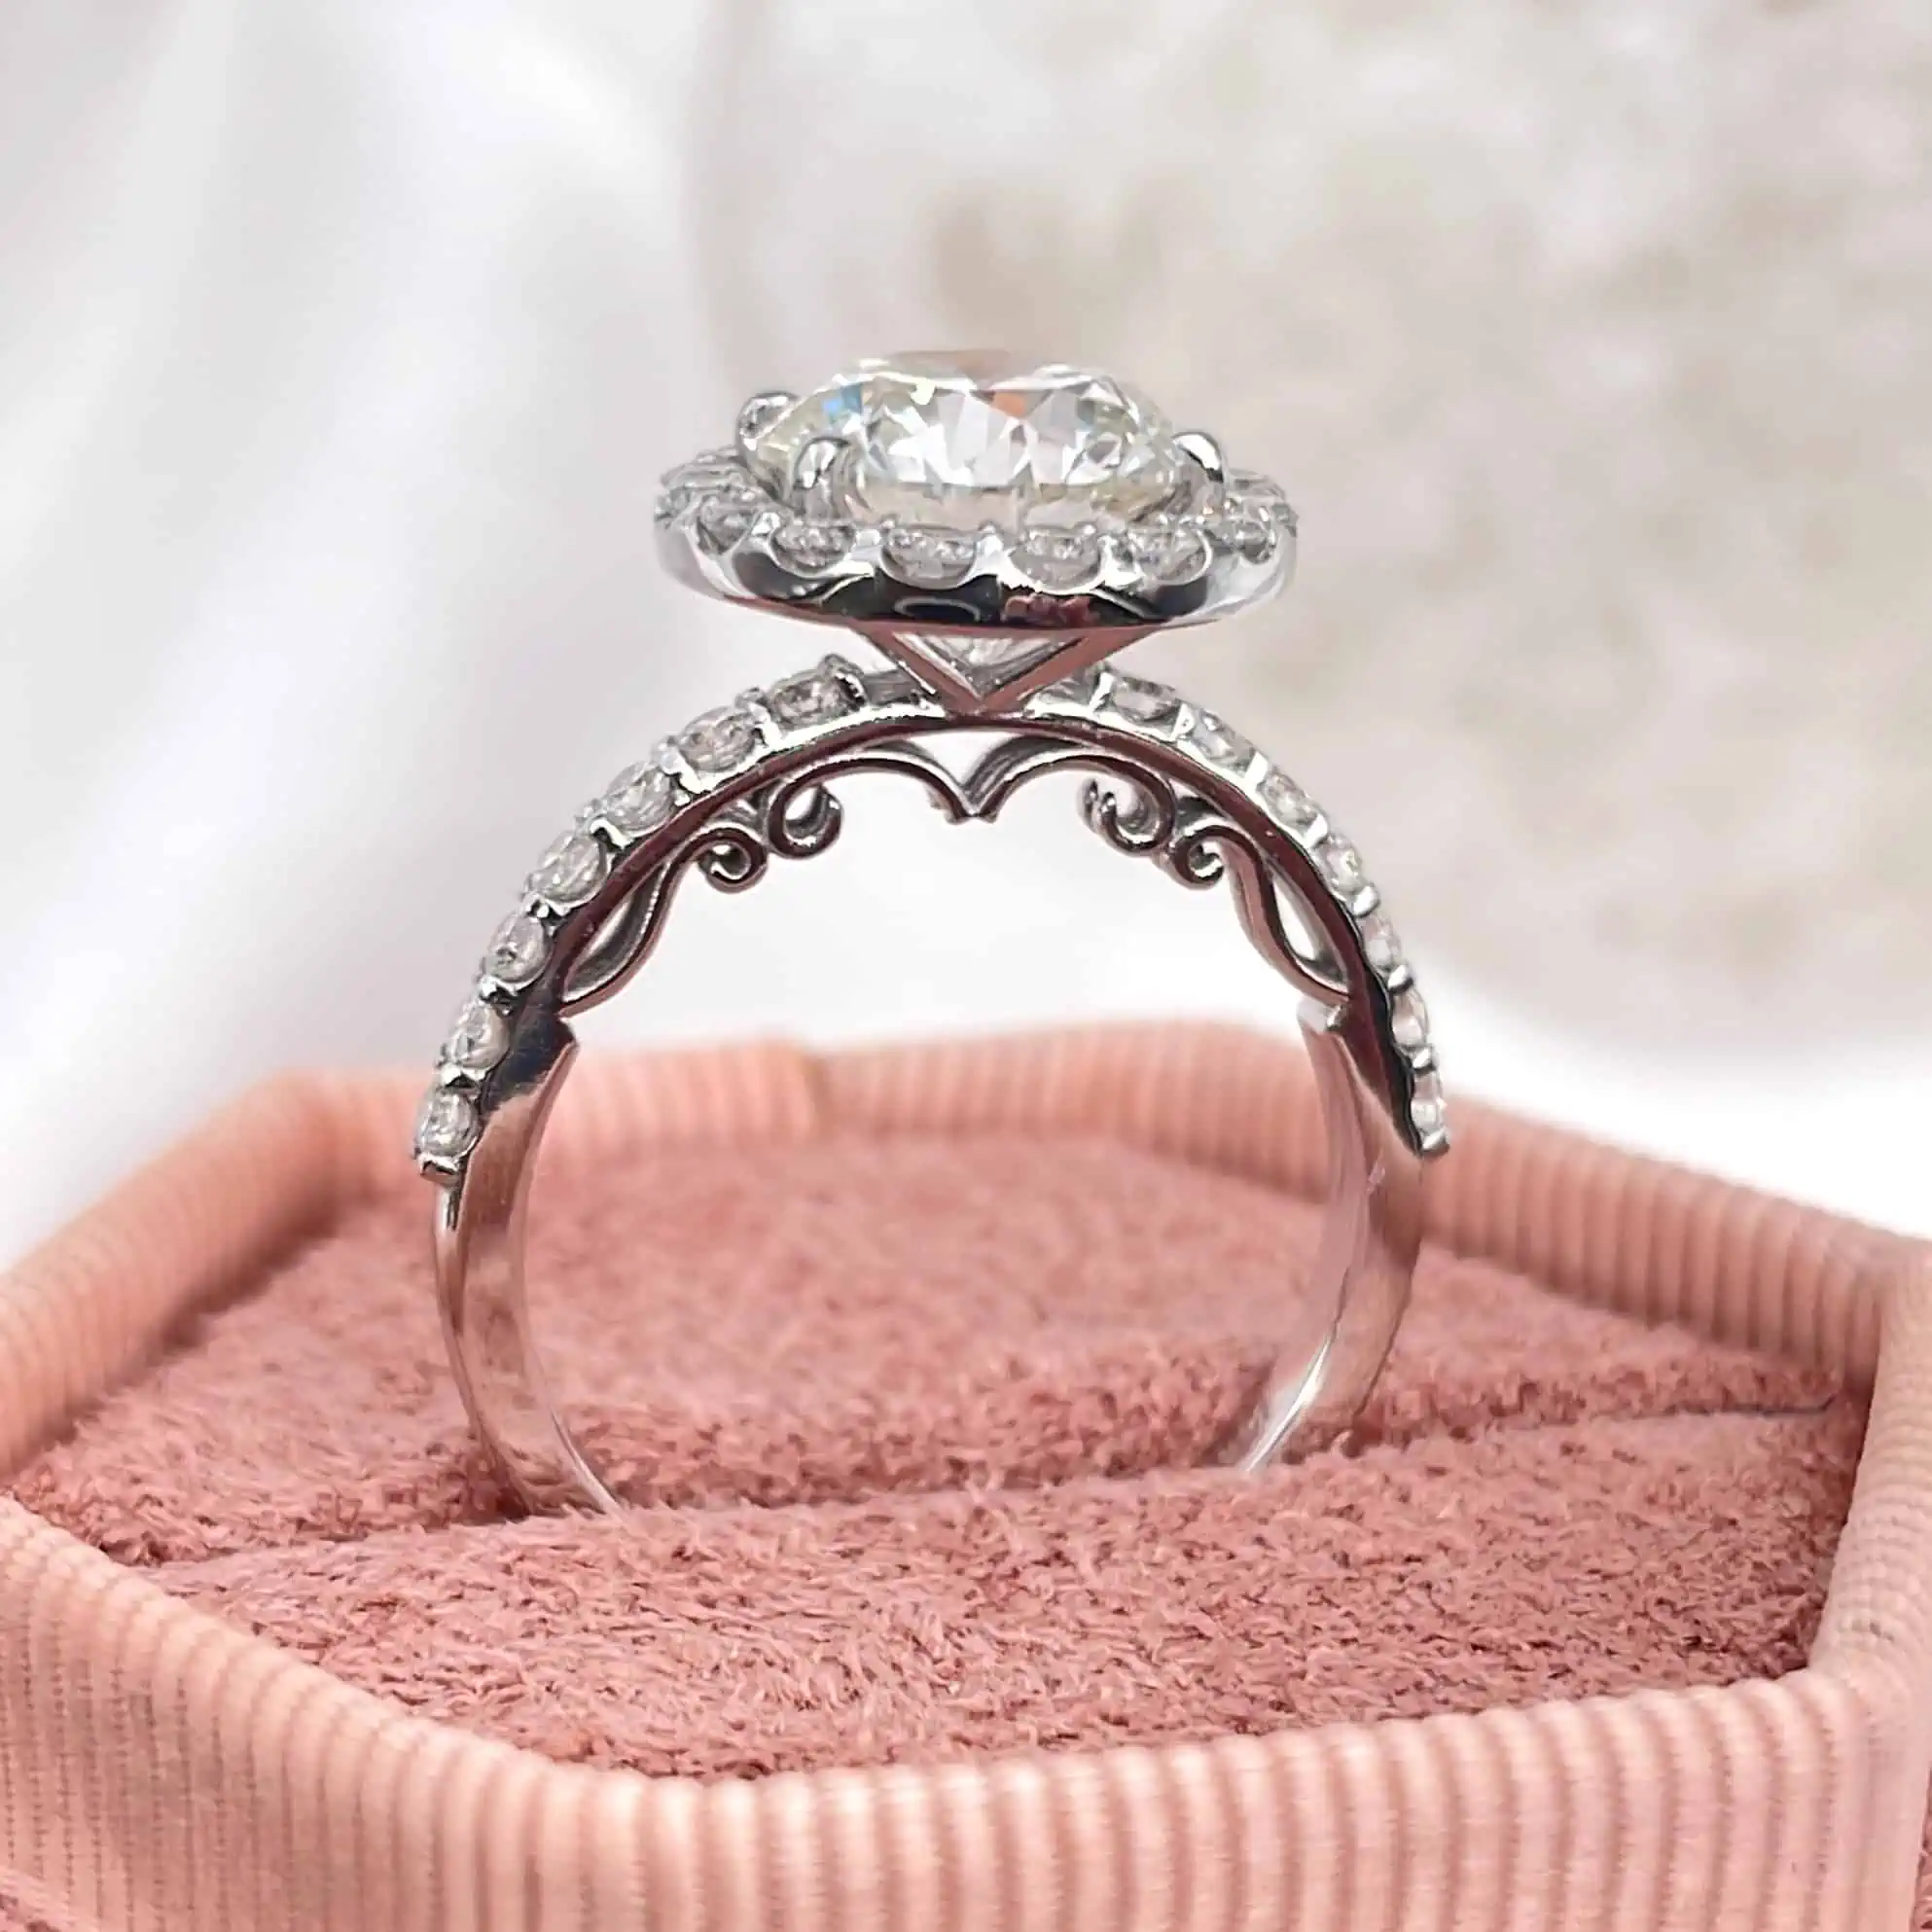 Unique Round Halo Lab Diamond Engagement Ring placed on a pink box